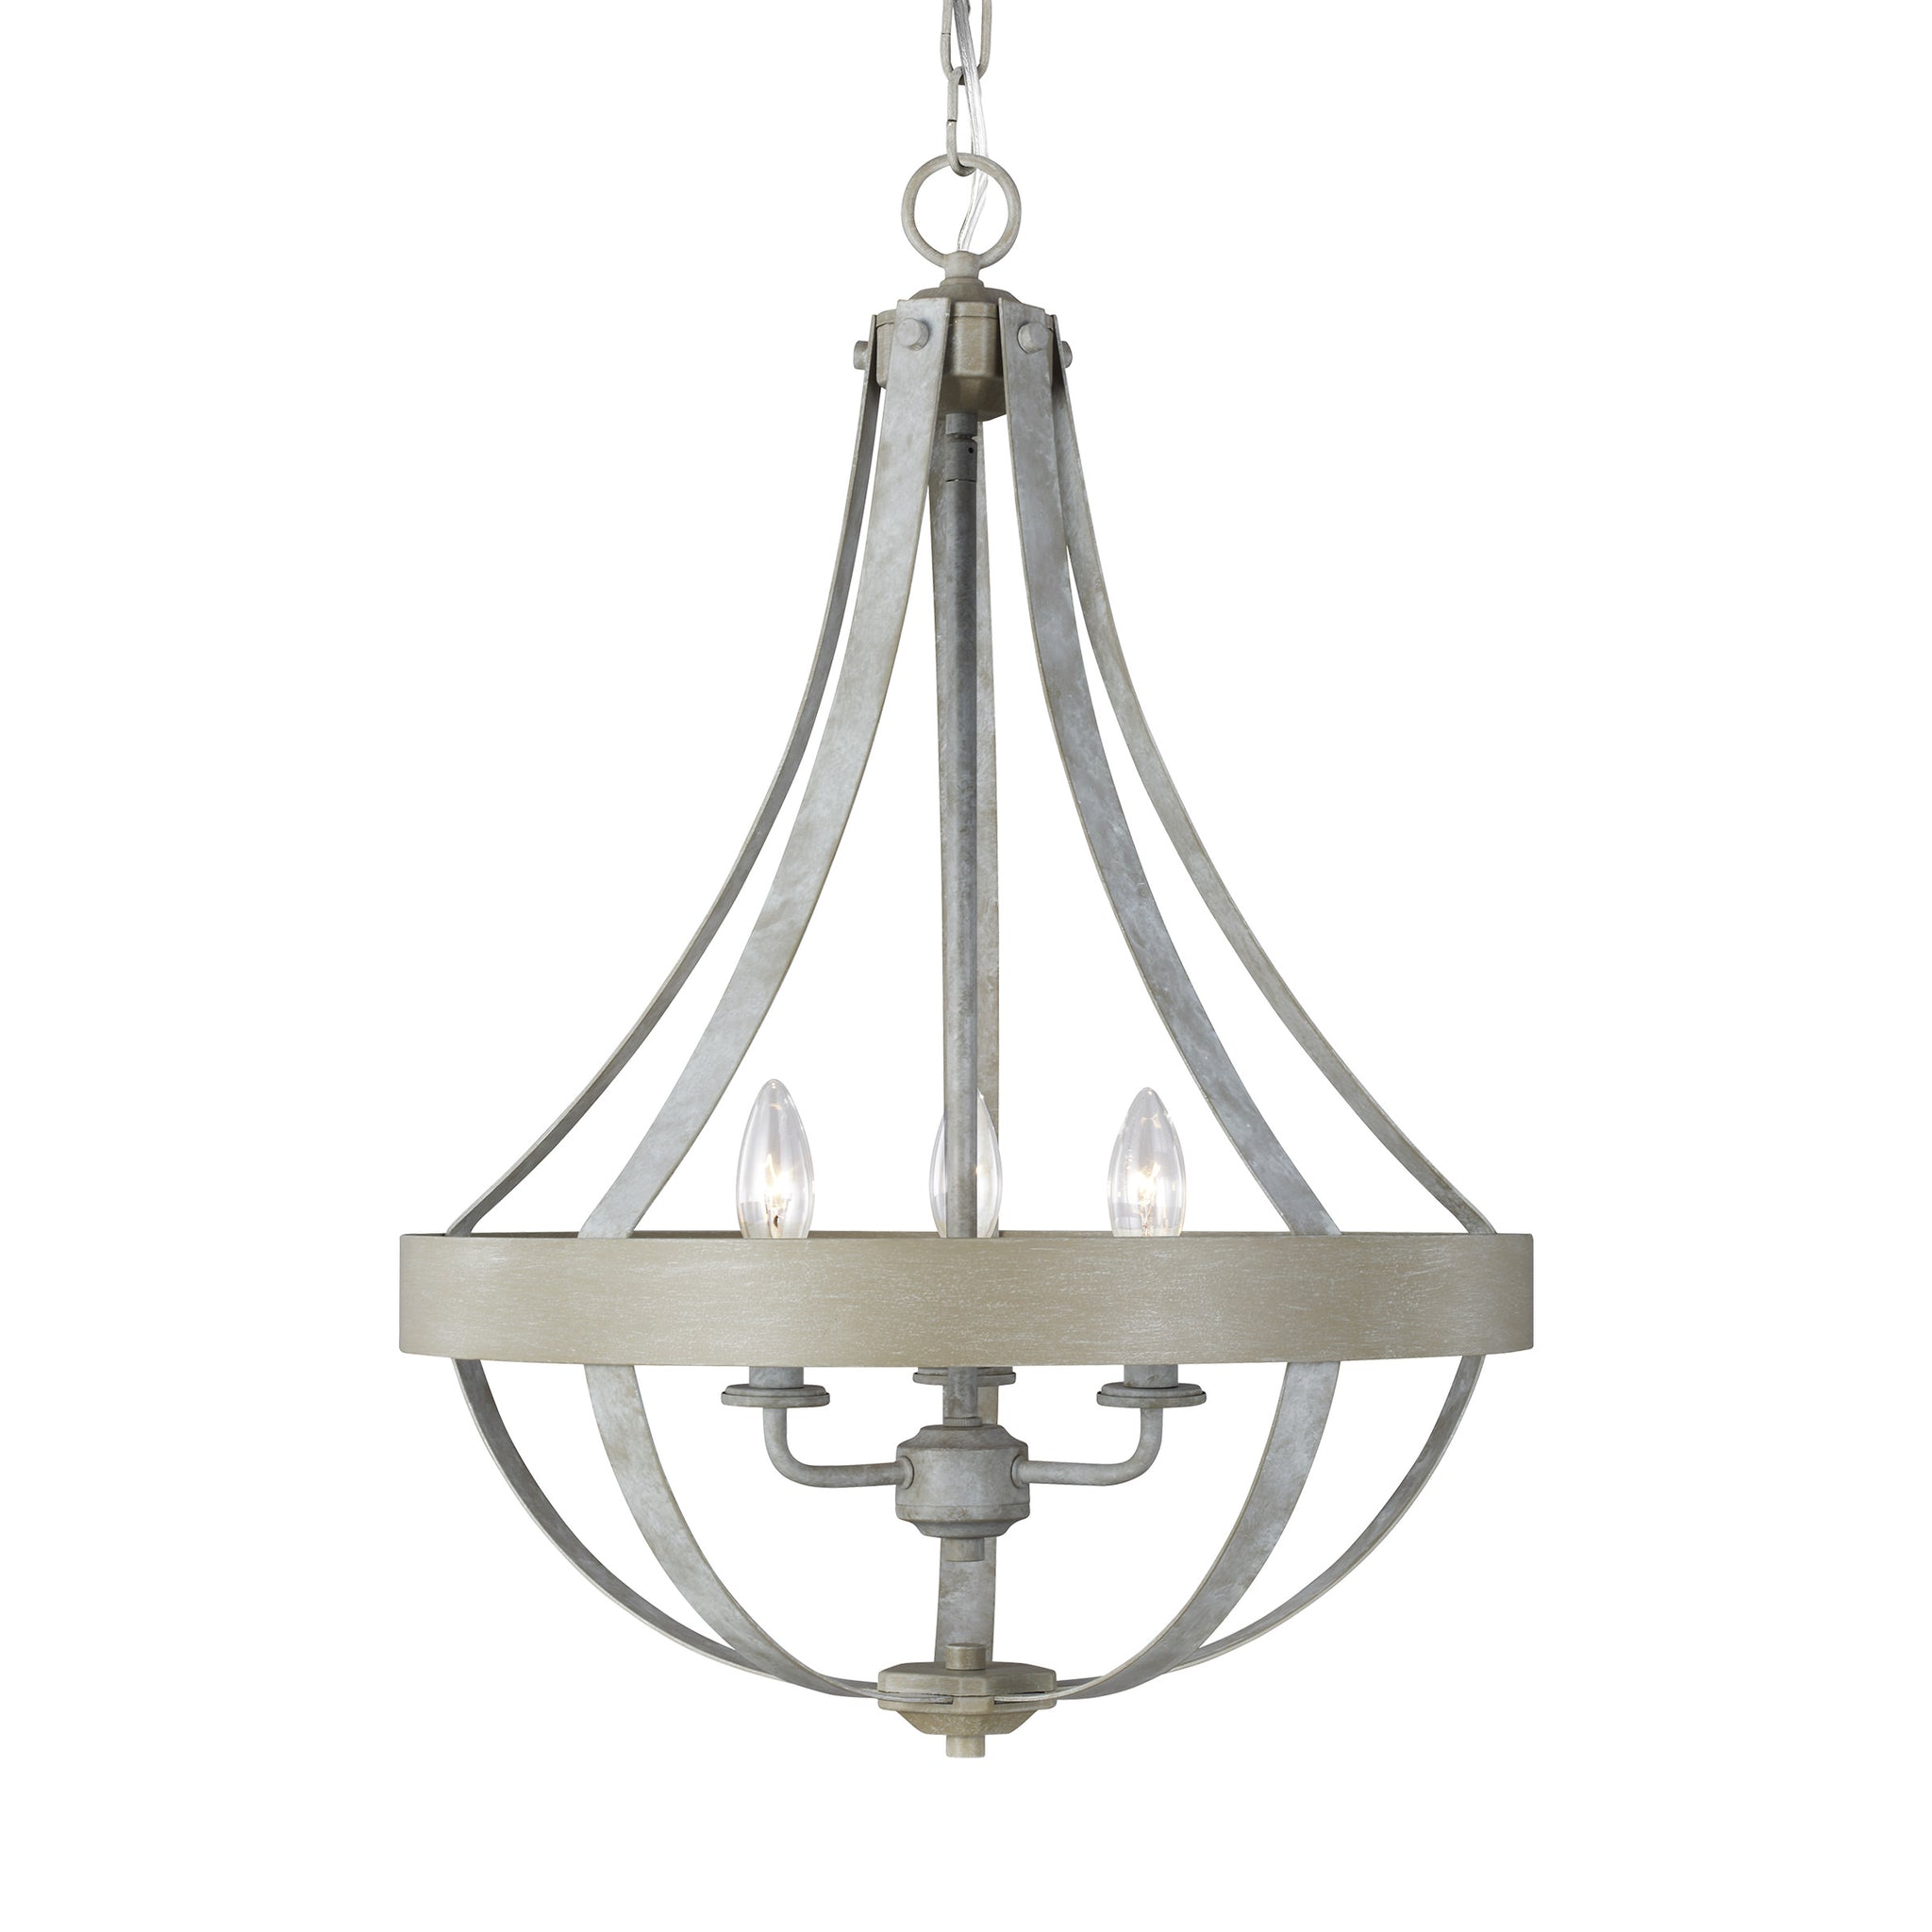 Davlin Chandelier French Washed Oak / Distressed White Wood